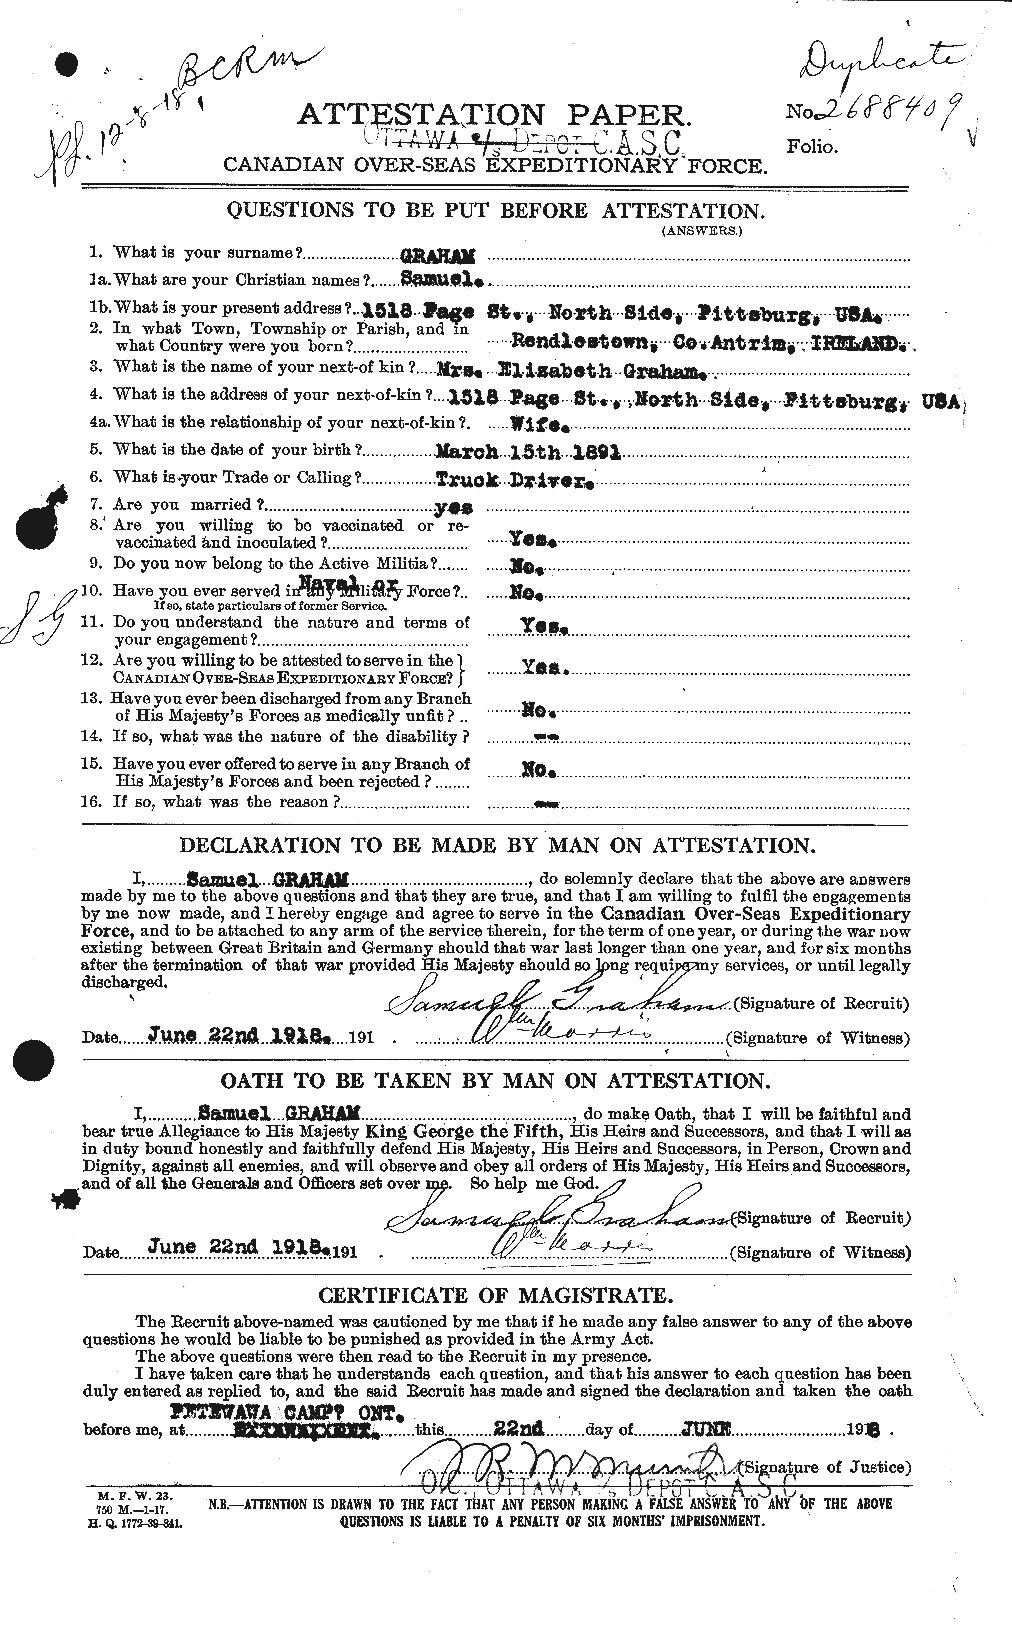 Personnel Records of the First World War - CEF 359451a